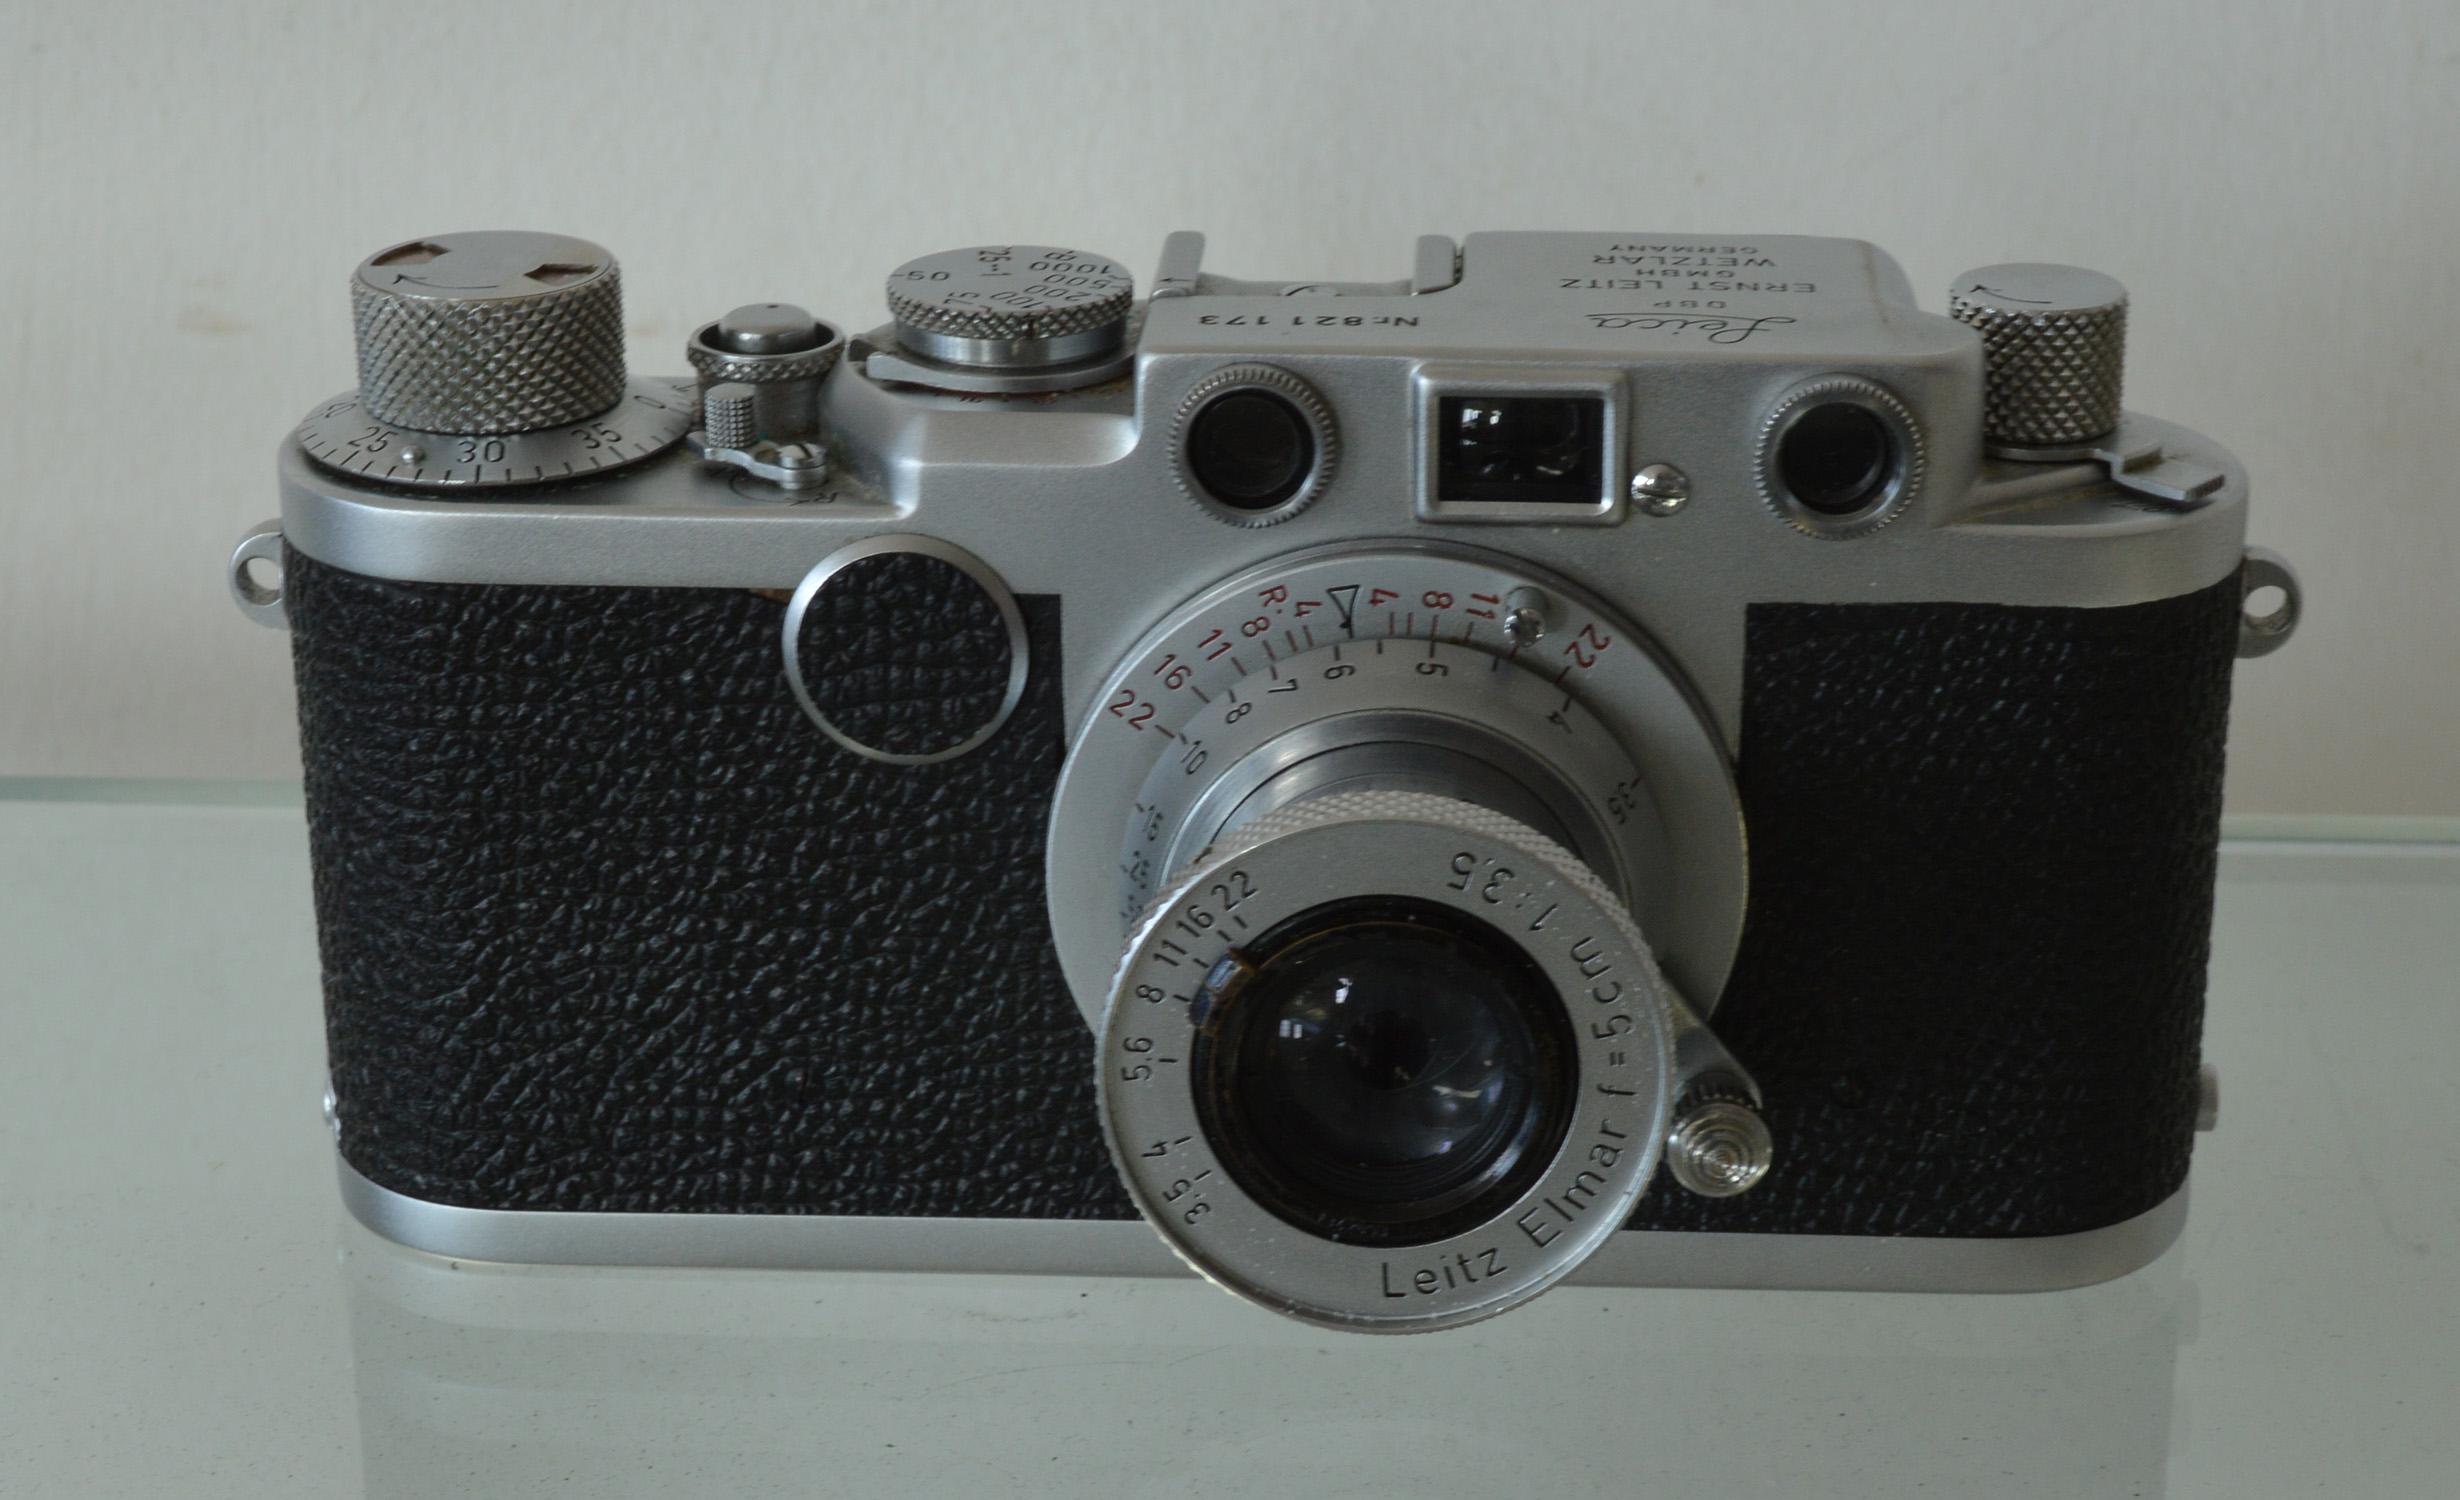 Leica iif 35mm camera. In production from 1951 to 1956.

With the Leitz Elmar lens.

With the original leather case.

Great condition.

Please note we offer FREE SHIPPING.